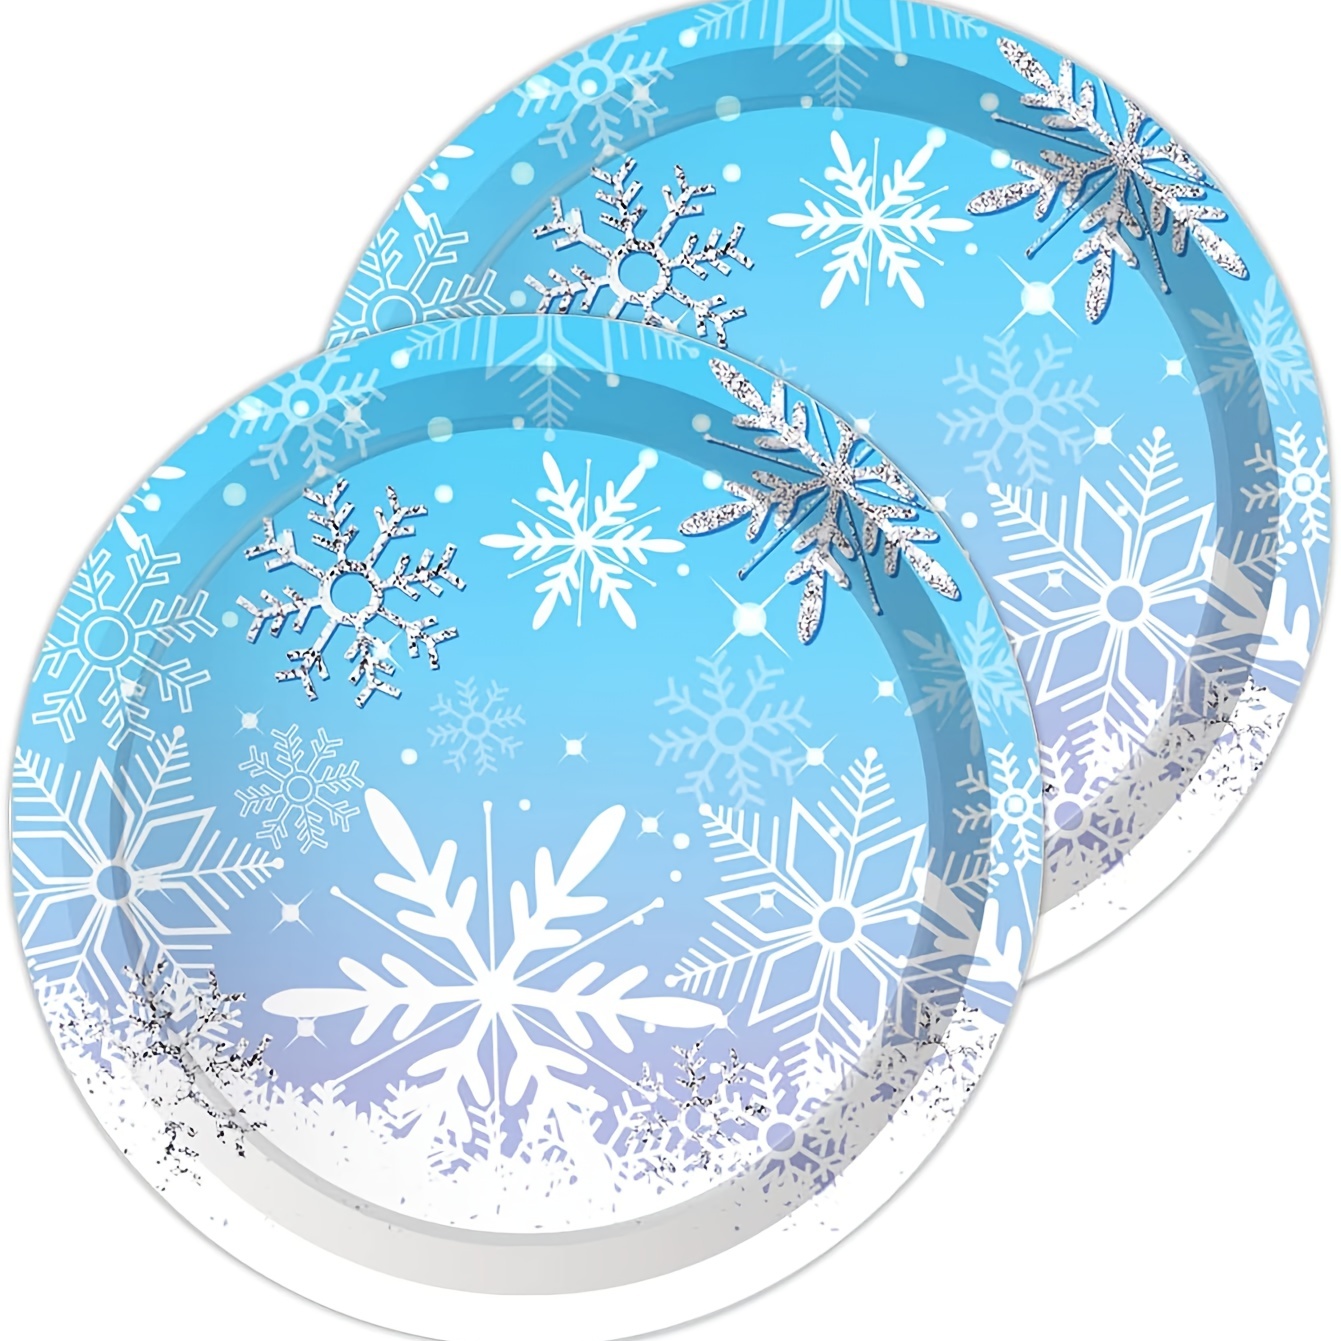 Winter Snowflake Party Plates Perfect For Christmas, Holiday  Celebrations, Baby Showers, Weddings, Bridal Showers, And New Year's Eve  Disposable Paper Plates In Blue And White Festive And Elegant Party